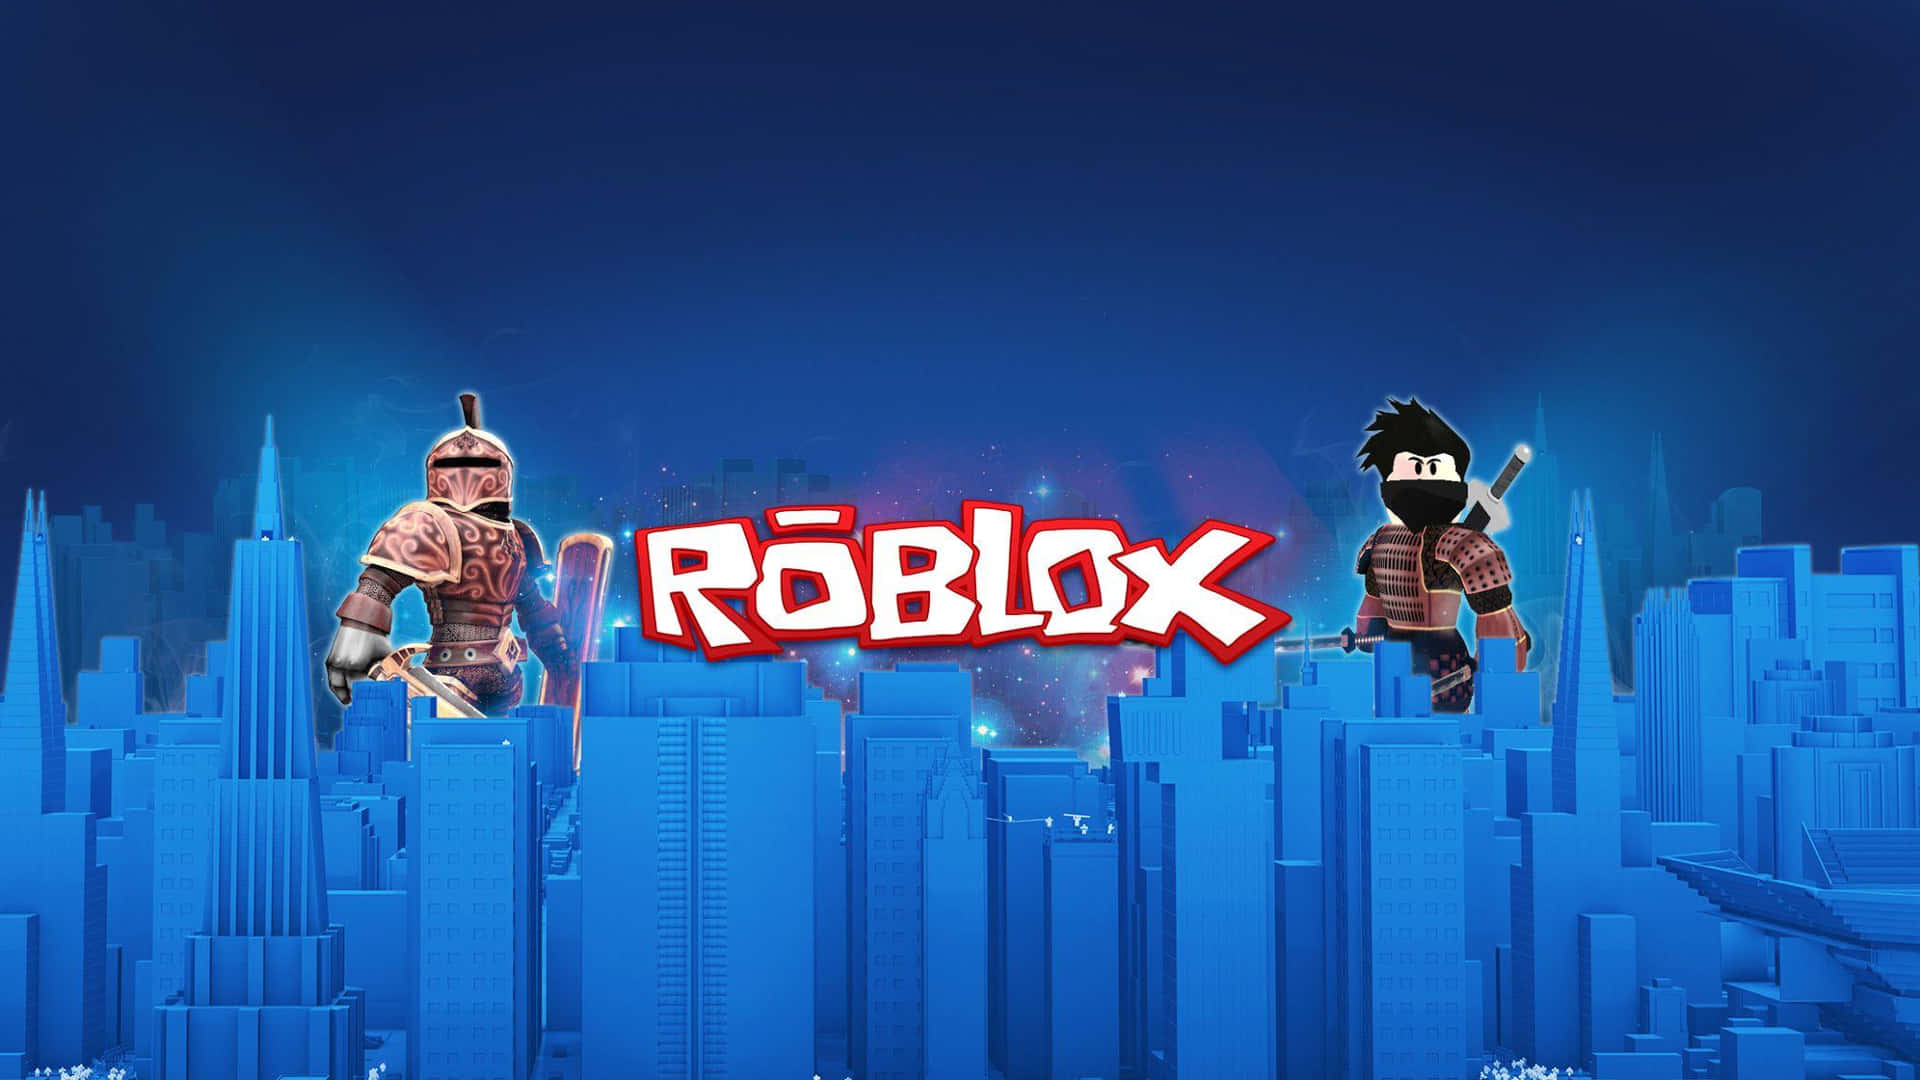 Download Caption: Thrilling Adventure Awaits! The Ultimate Roblox